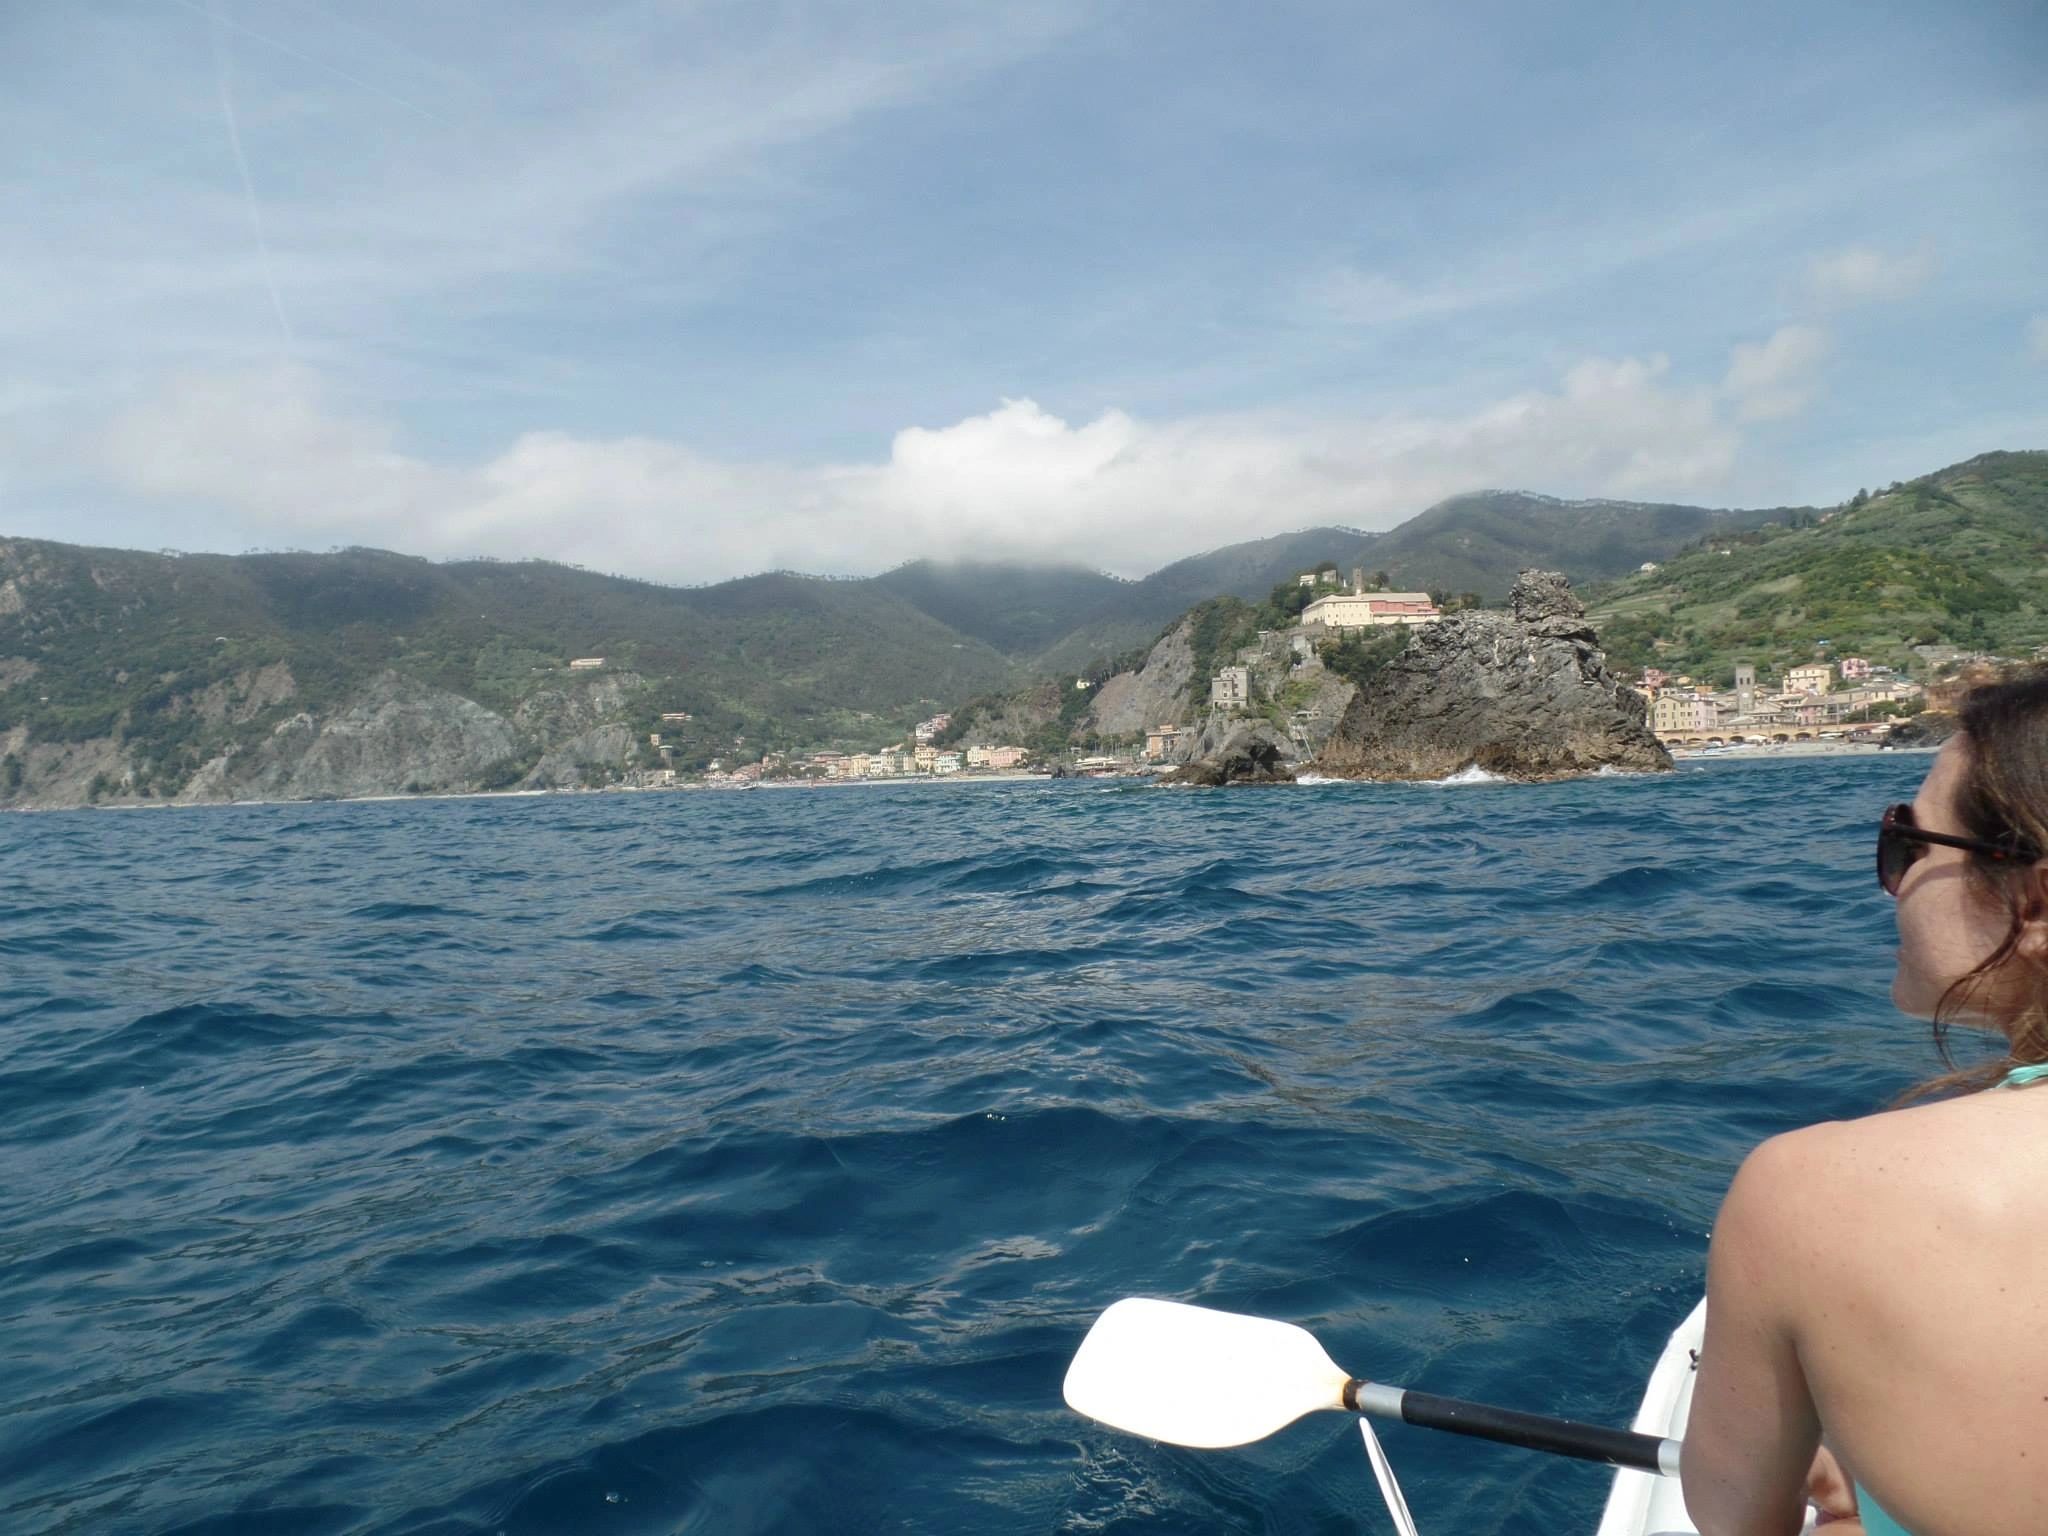 Mrs. Magic Travel Guy kayaking off the coast of Cinque Terre in Italy